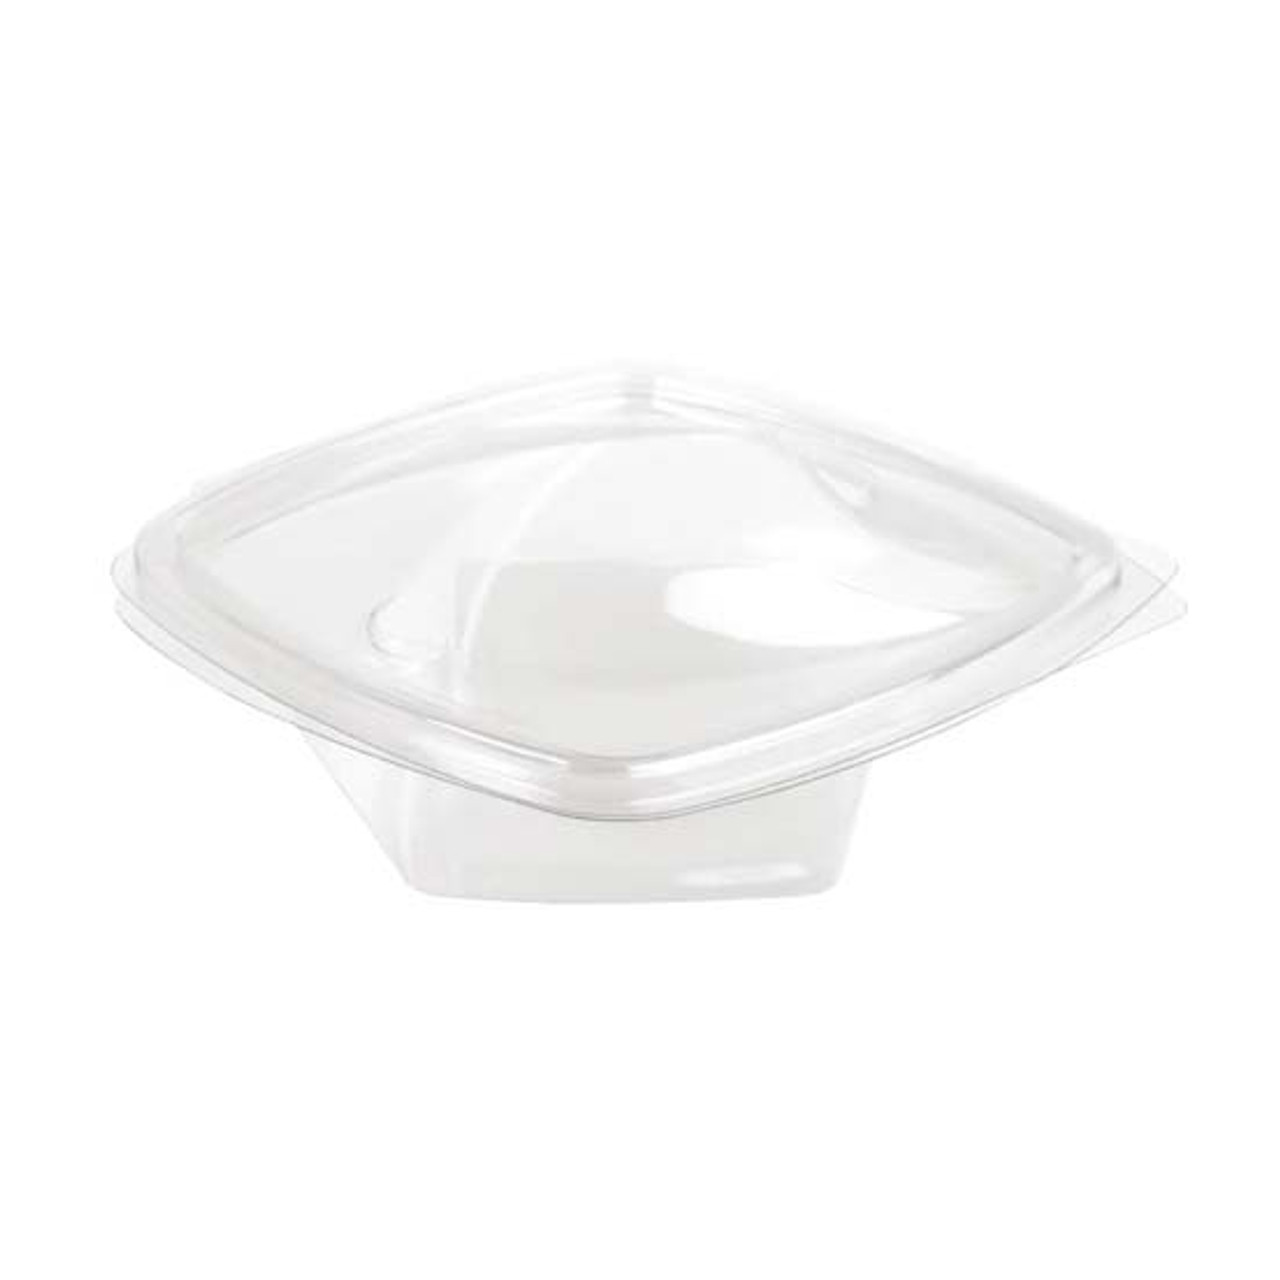 Twisty Recyclable Deli Salad Bowls With Lid 250ml / 9oz